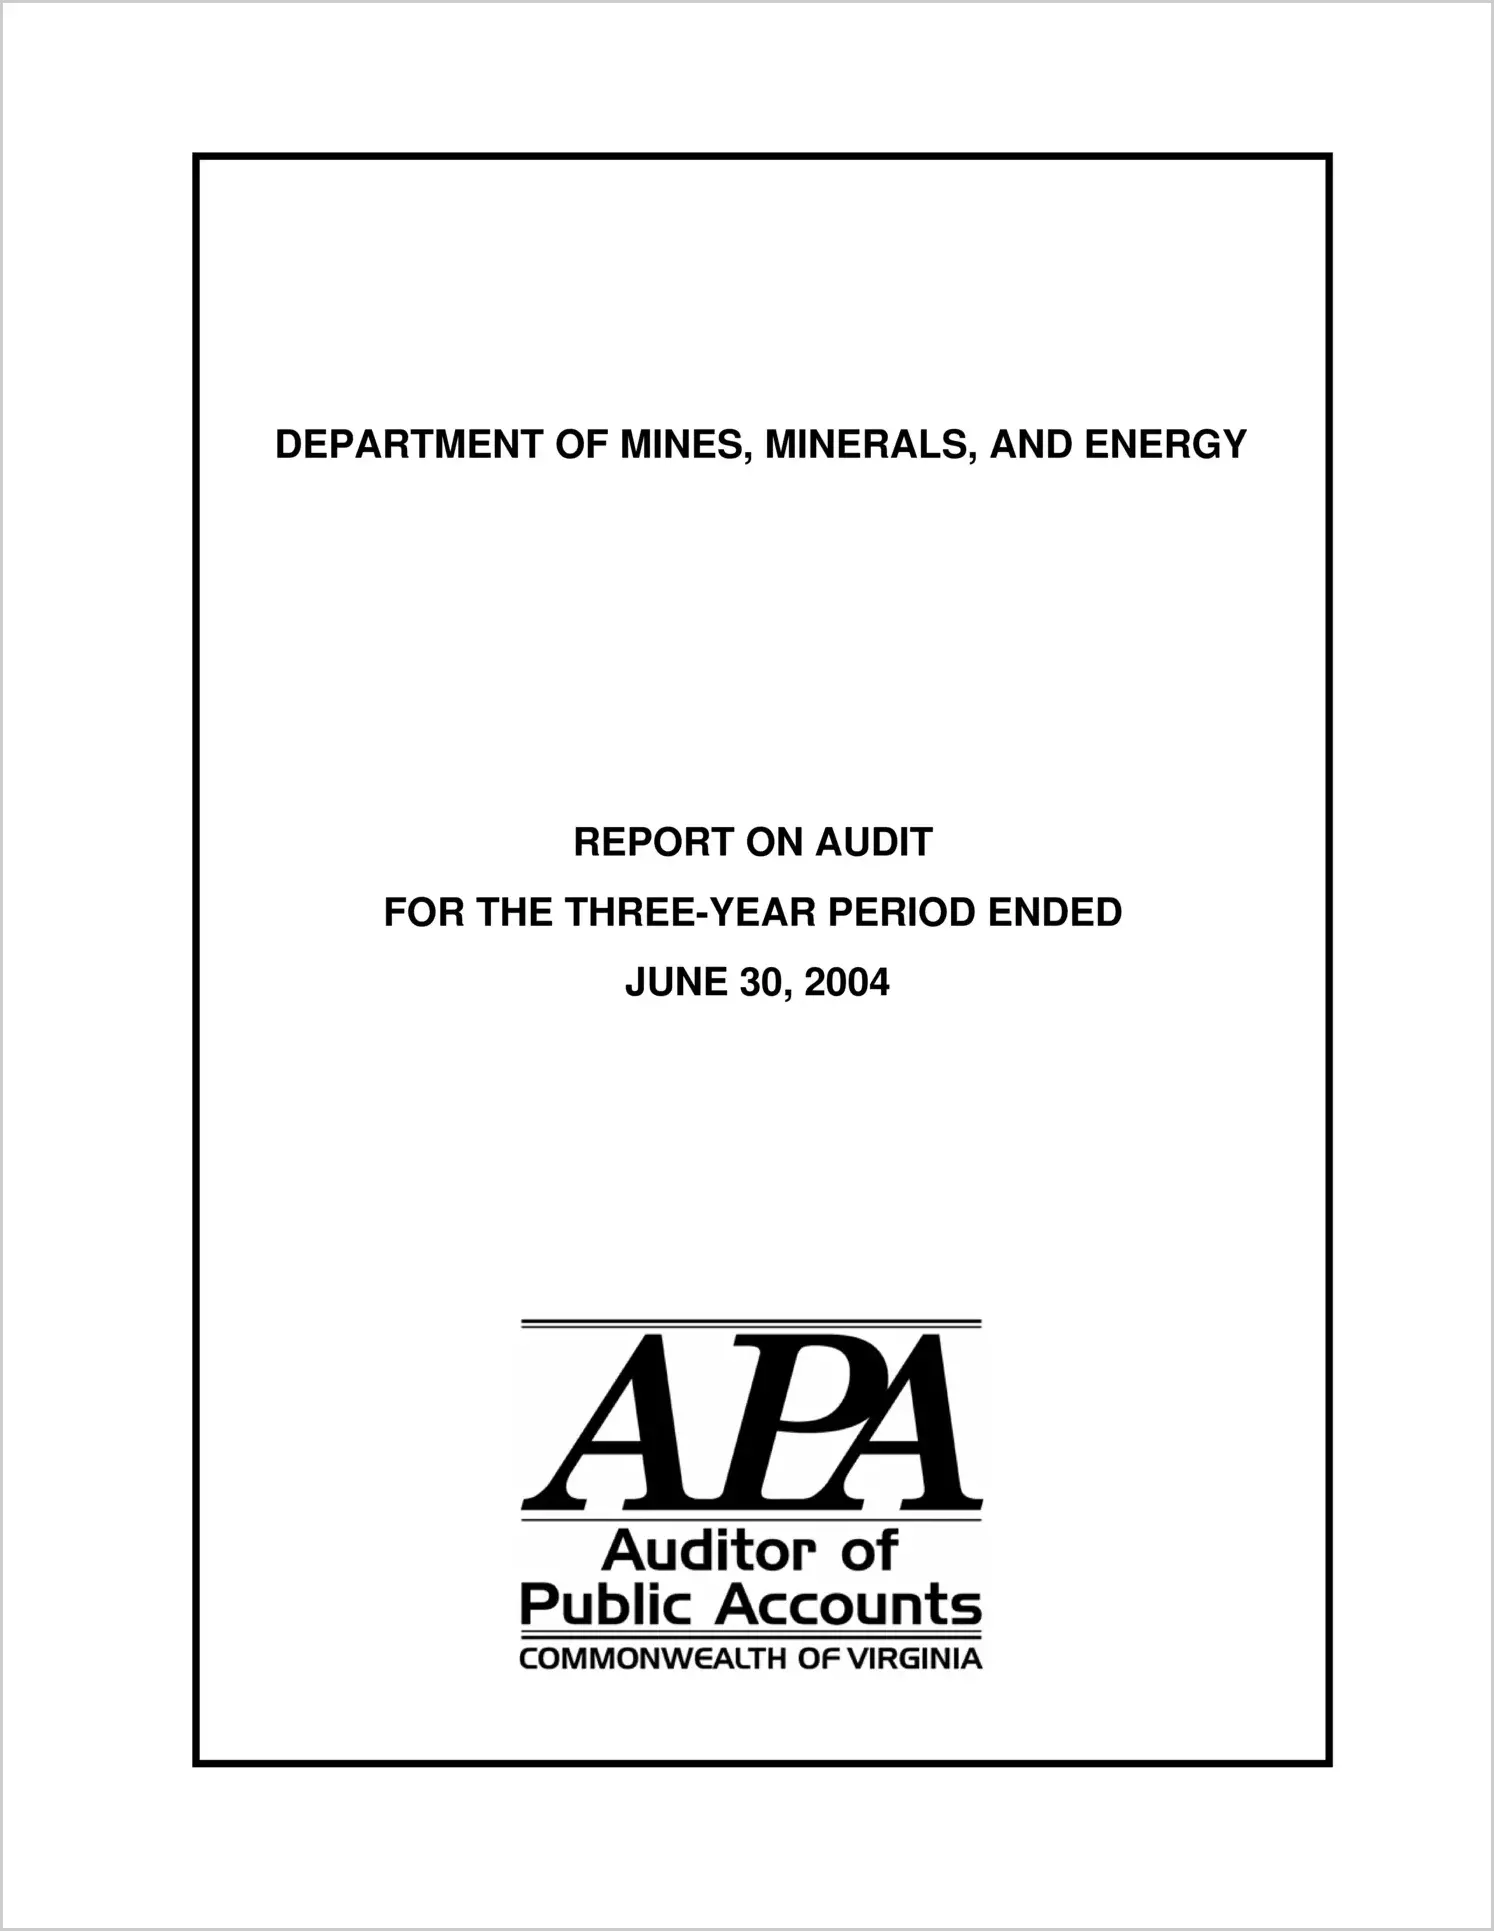 Department of Mines, Minerals, and Energy for the three year period ended June 30, 2004